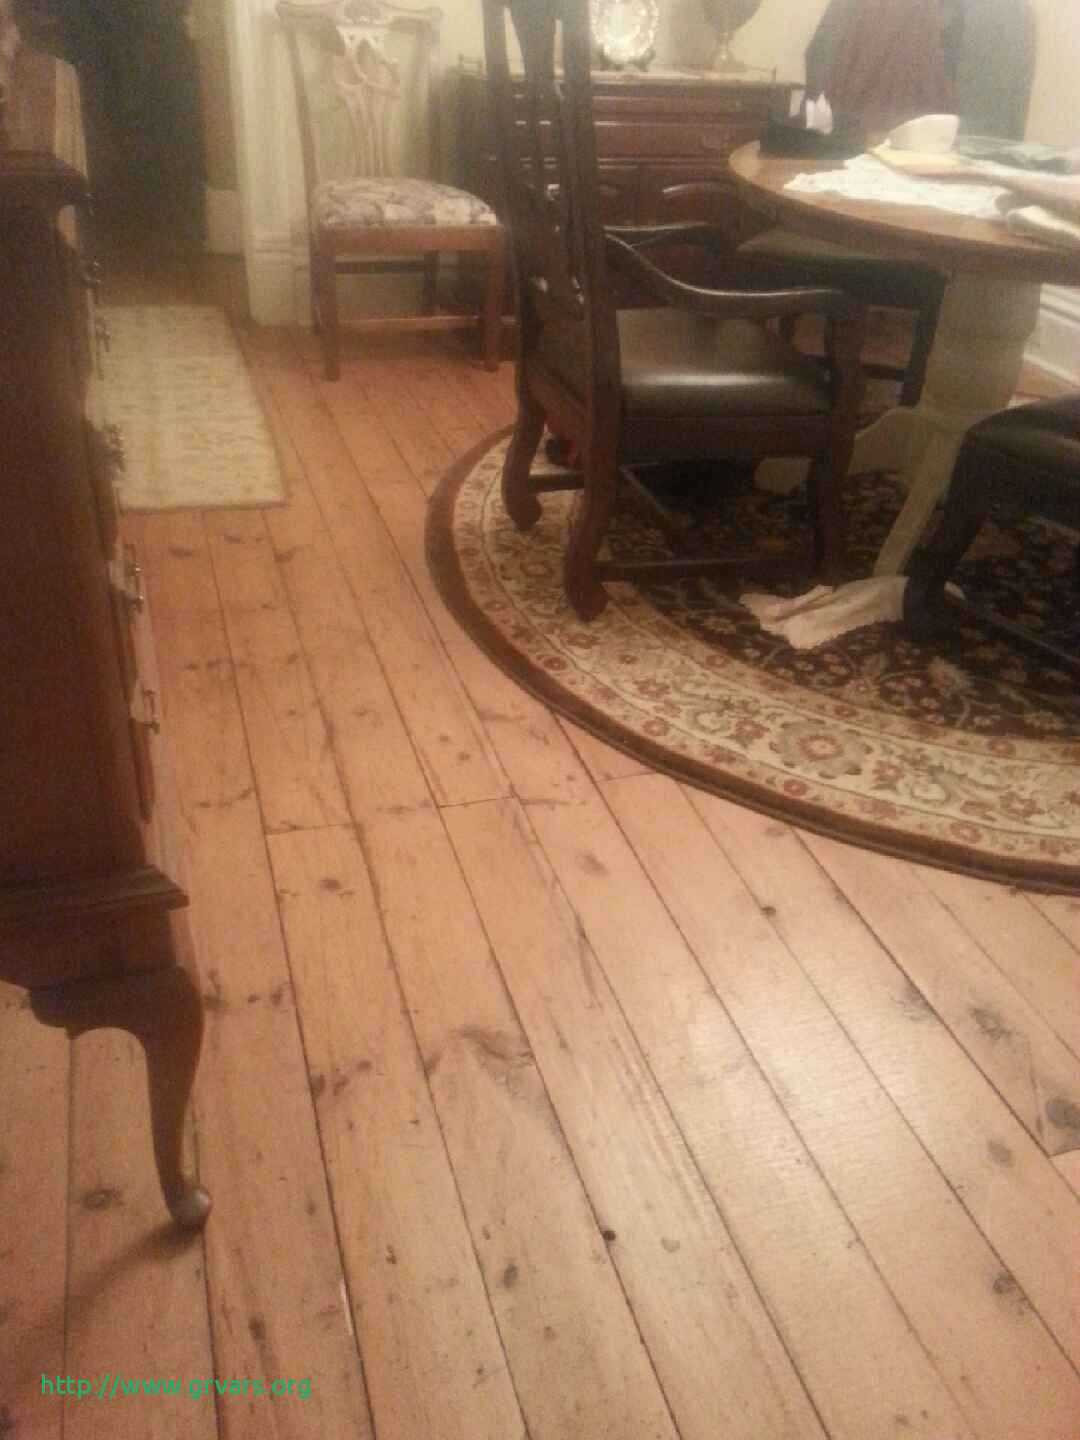 29 Awesome Ss Hardwood Floors 2024 free download ss hardwood floors of floor layers required frais s s media cache ak0 pinimg originals f4 throughout floor layers required frais holland village house built in 1882 typical pine floors were